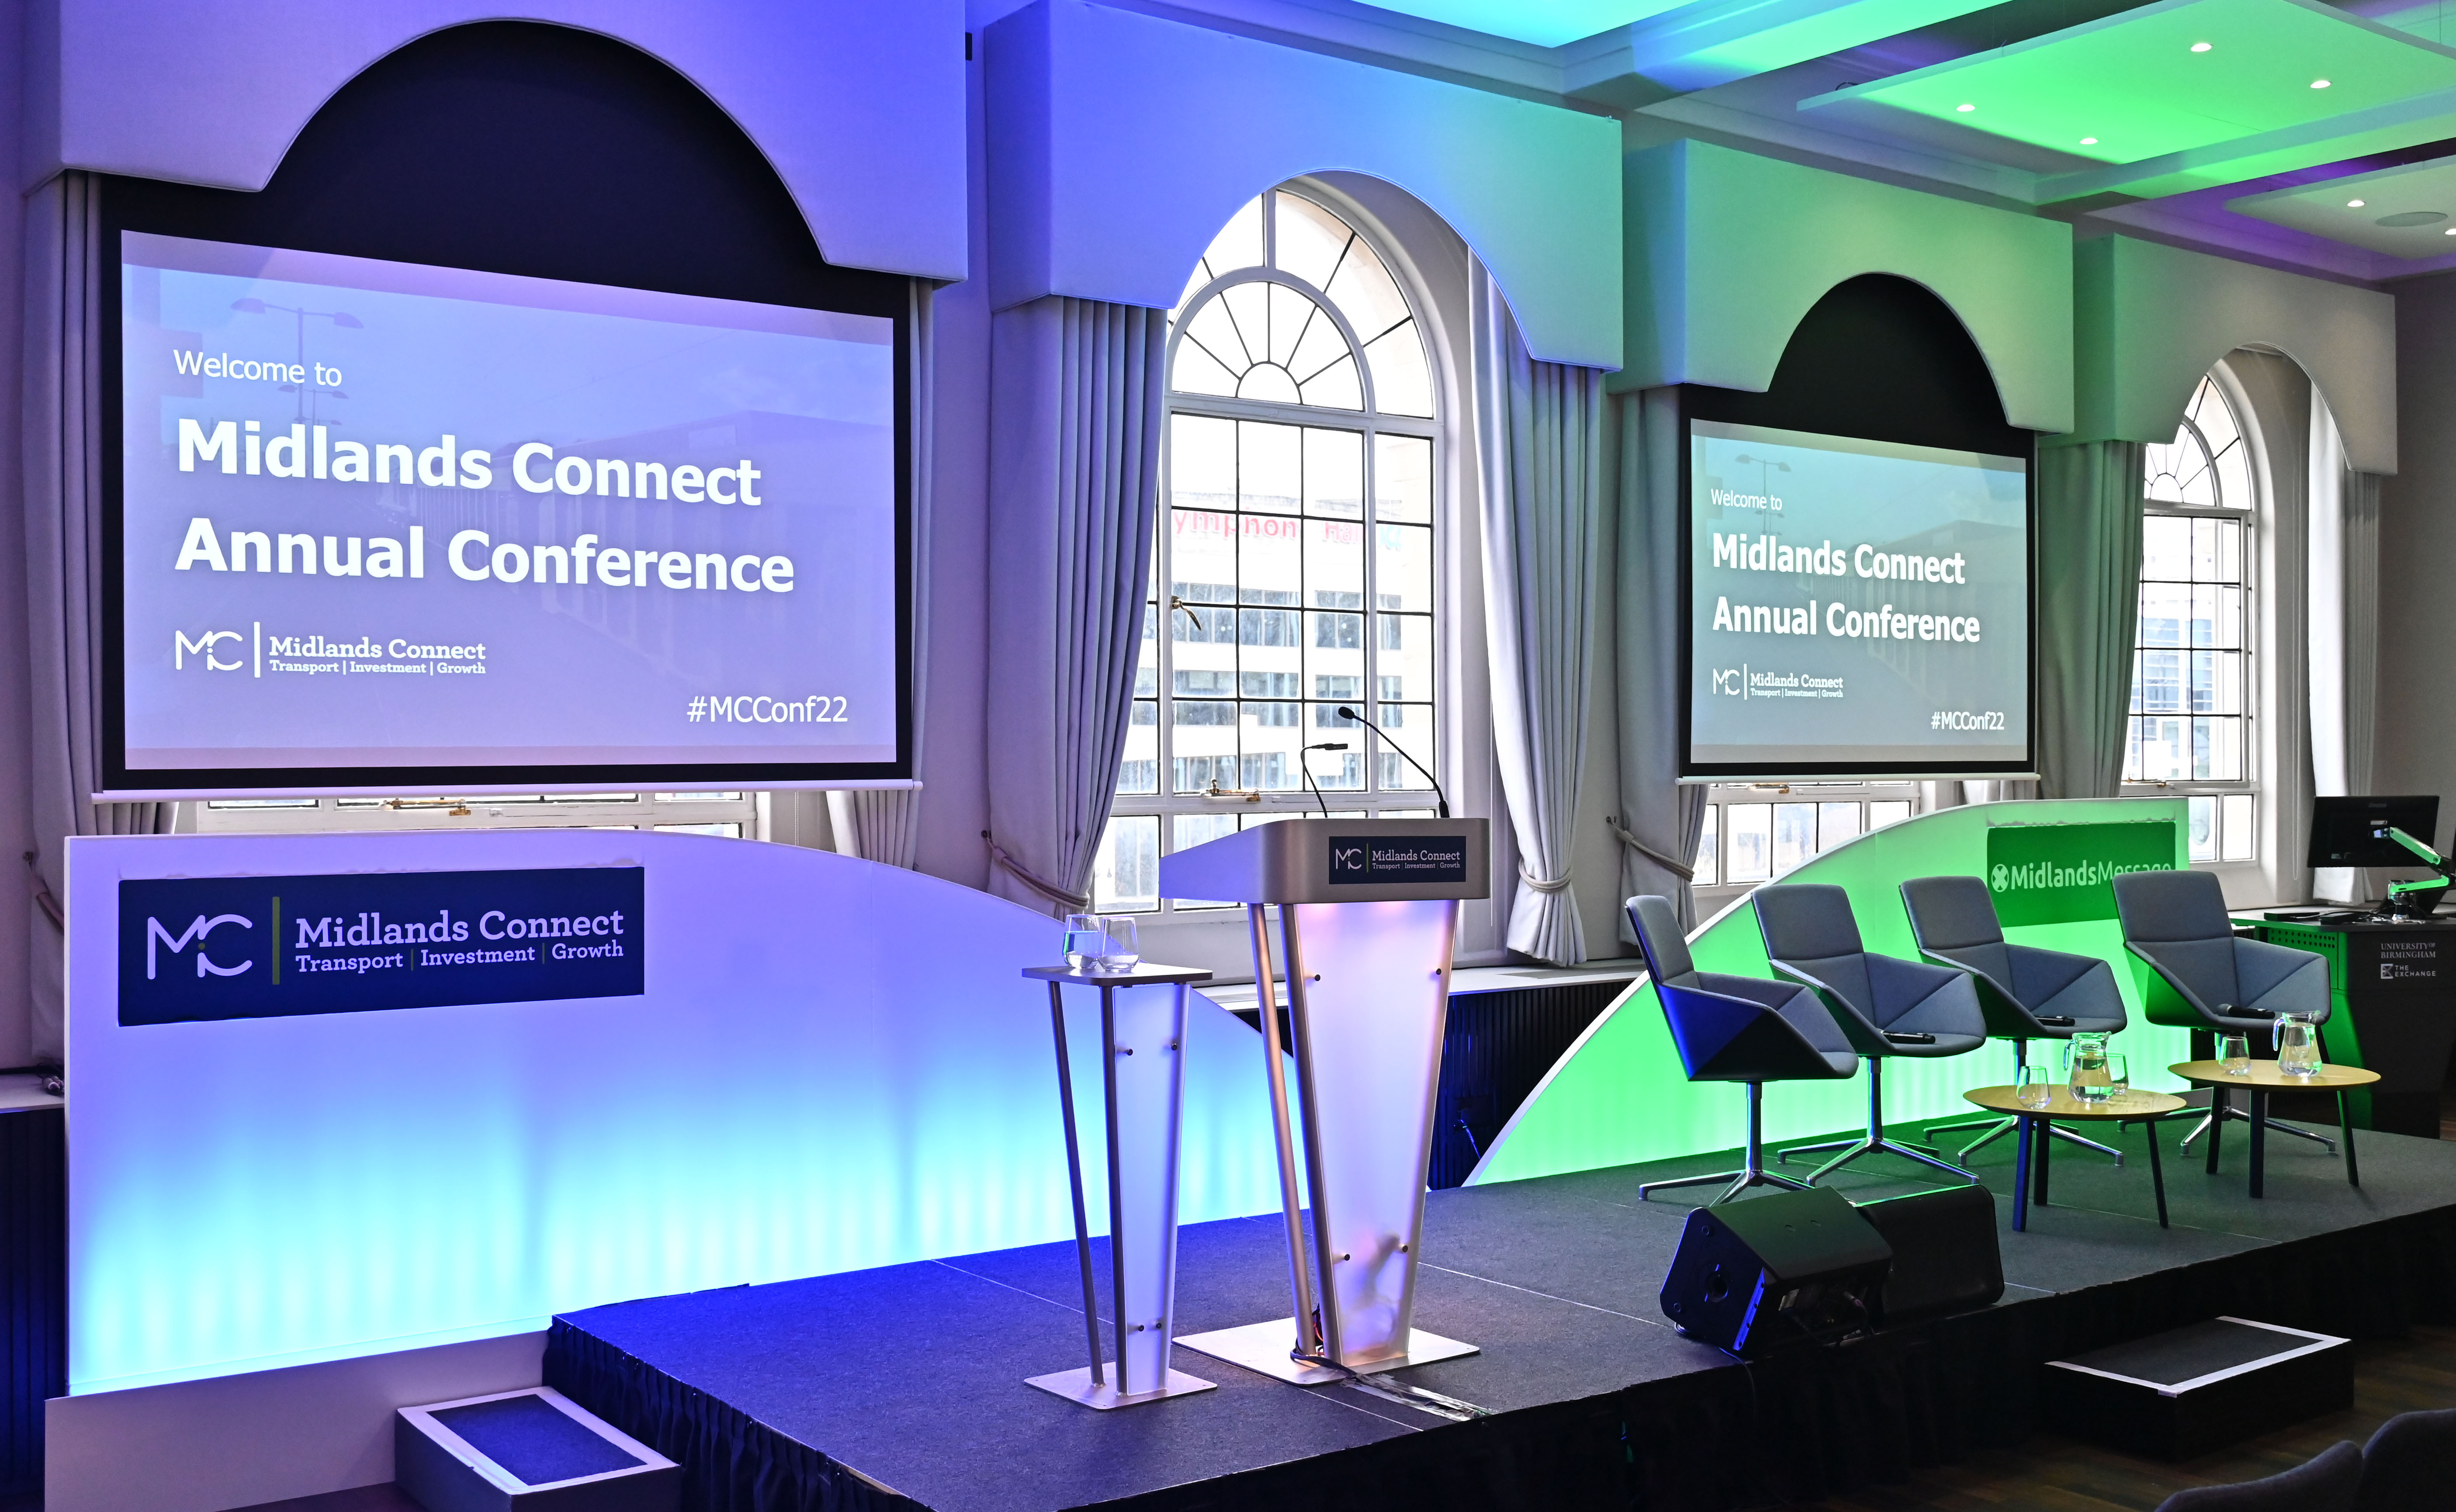 Midlands Connect 2023 Annual Conference